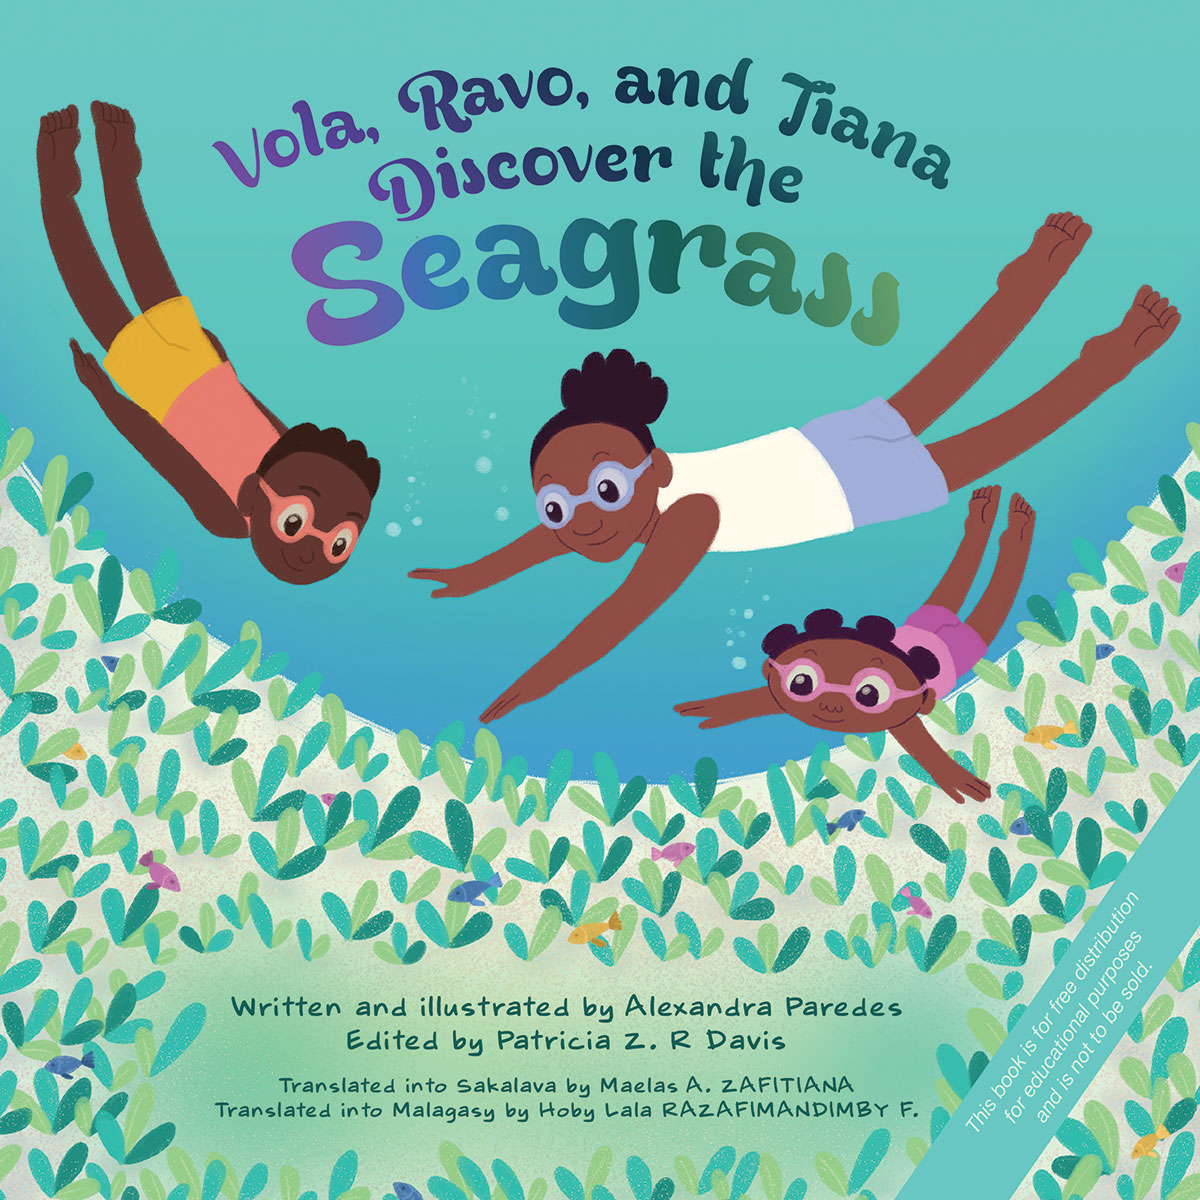 Vola, Ravo, and Tiana Discover the Seagrass